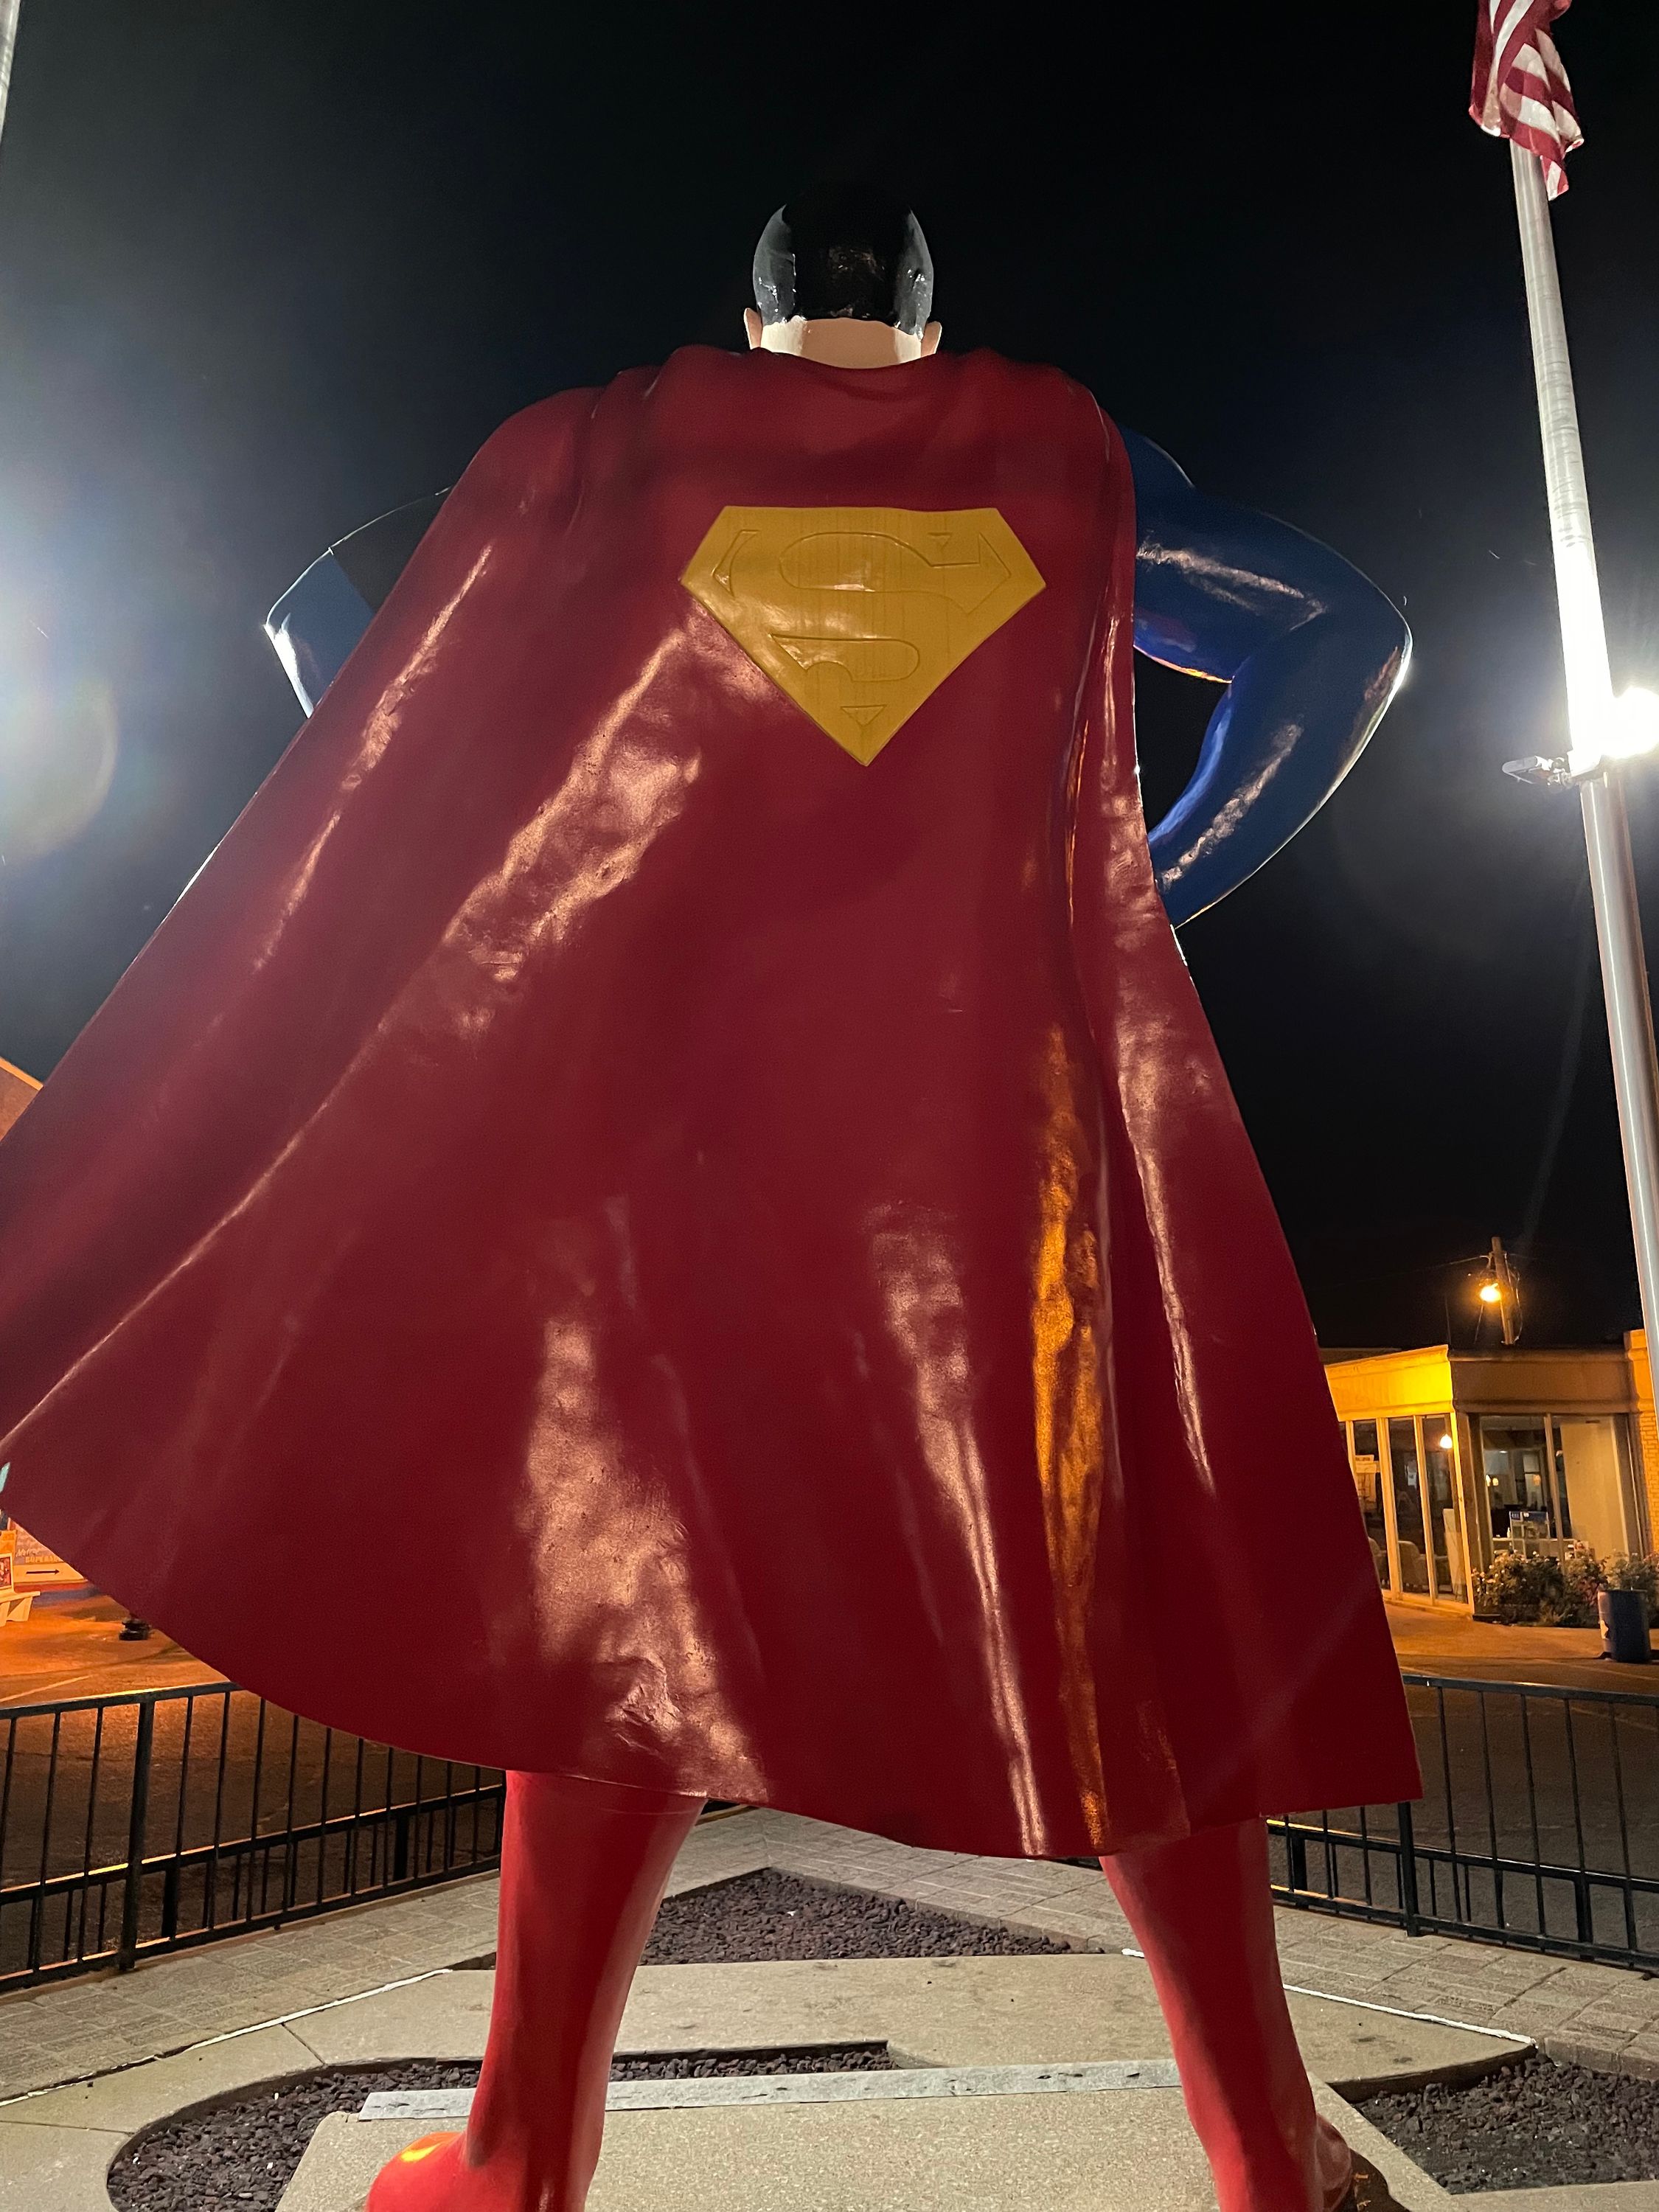 The giant Superman Statue at night